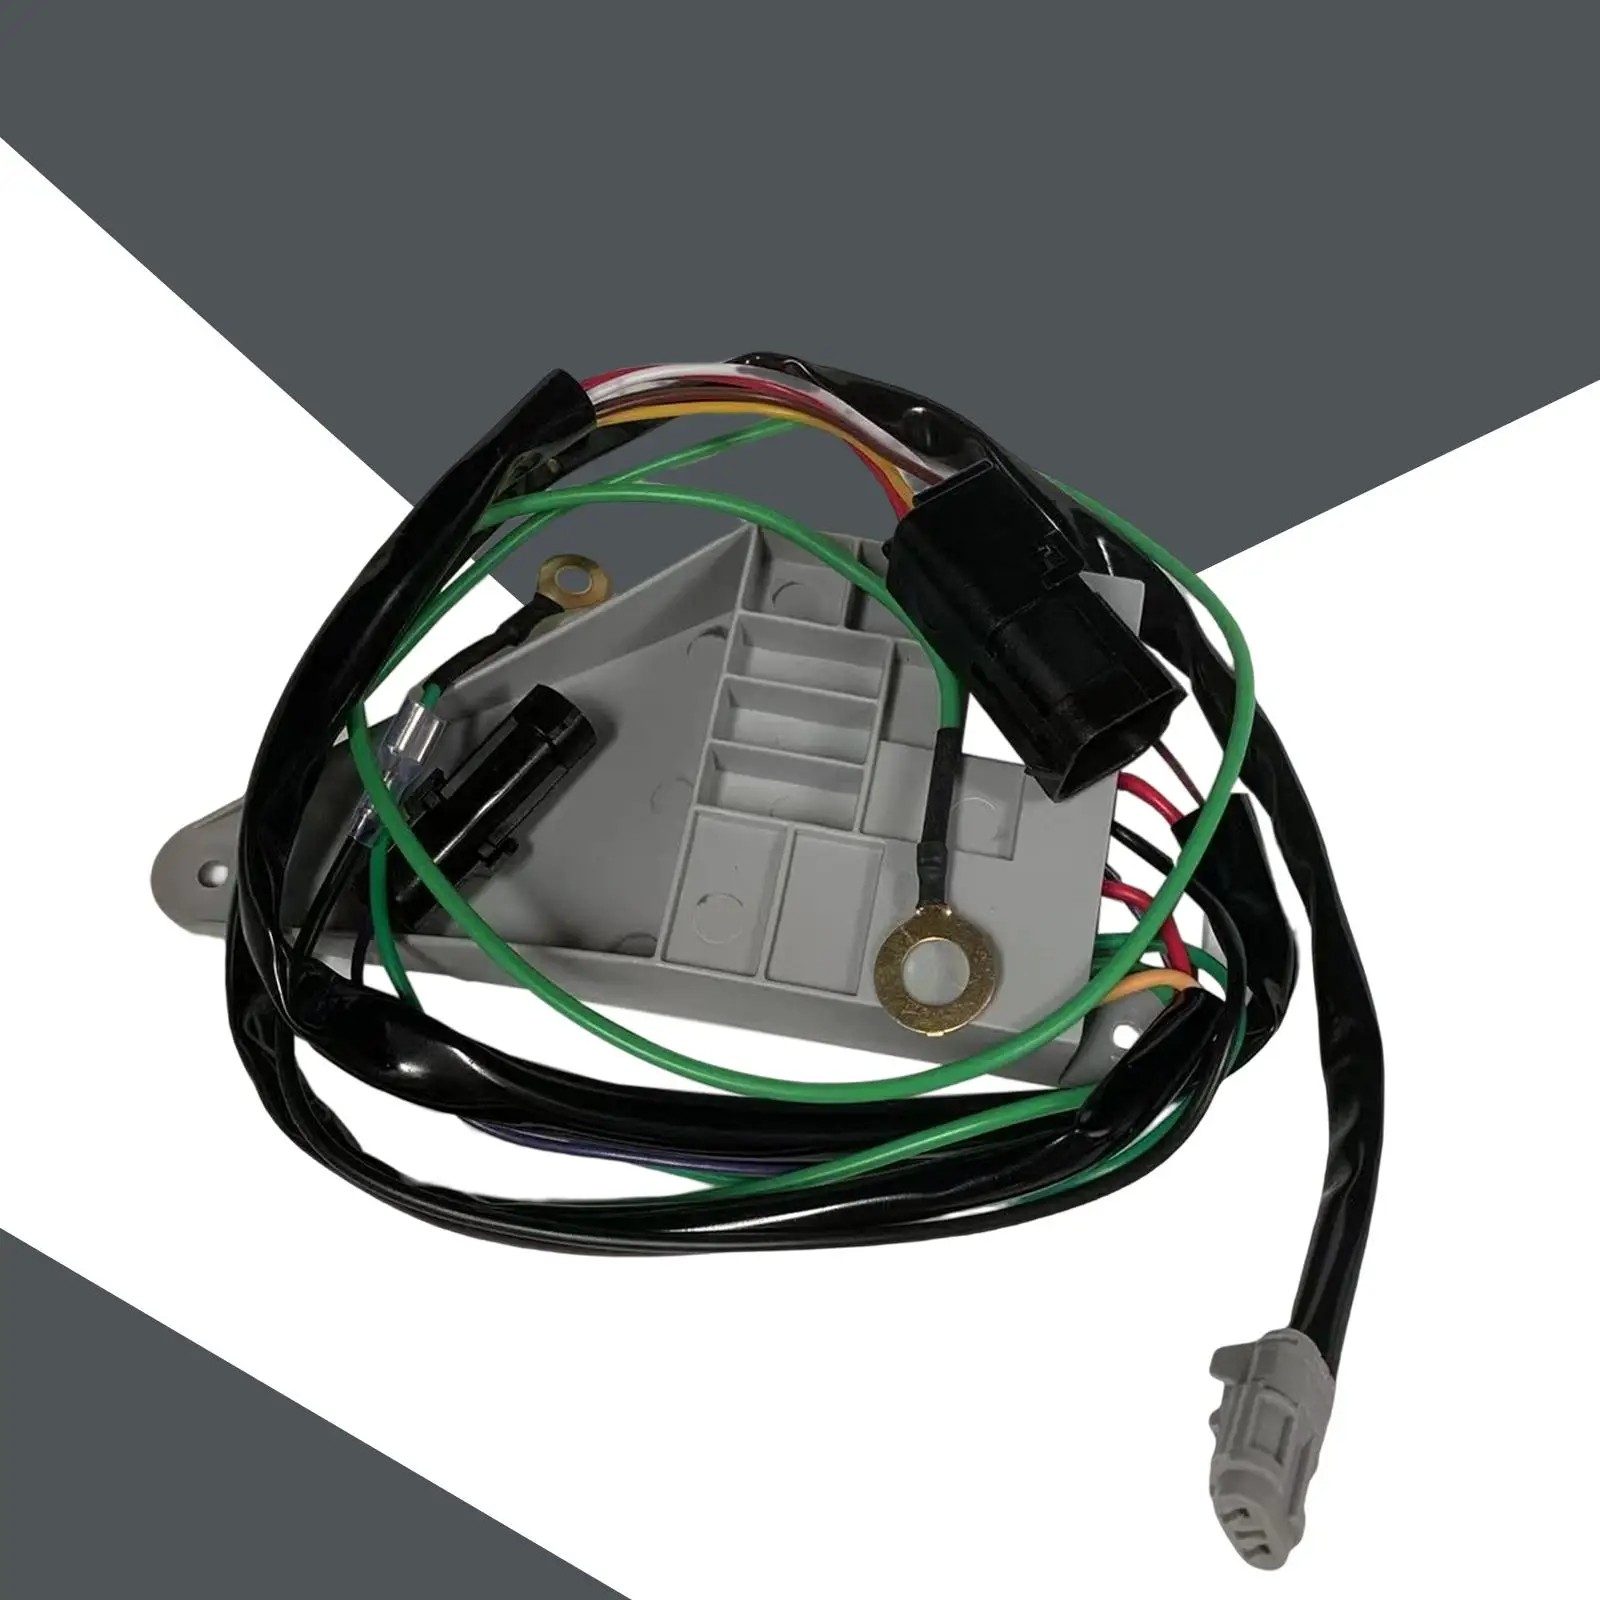 Control Unit Assembly Kit Components for Recreational Vehicles